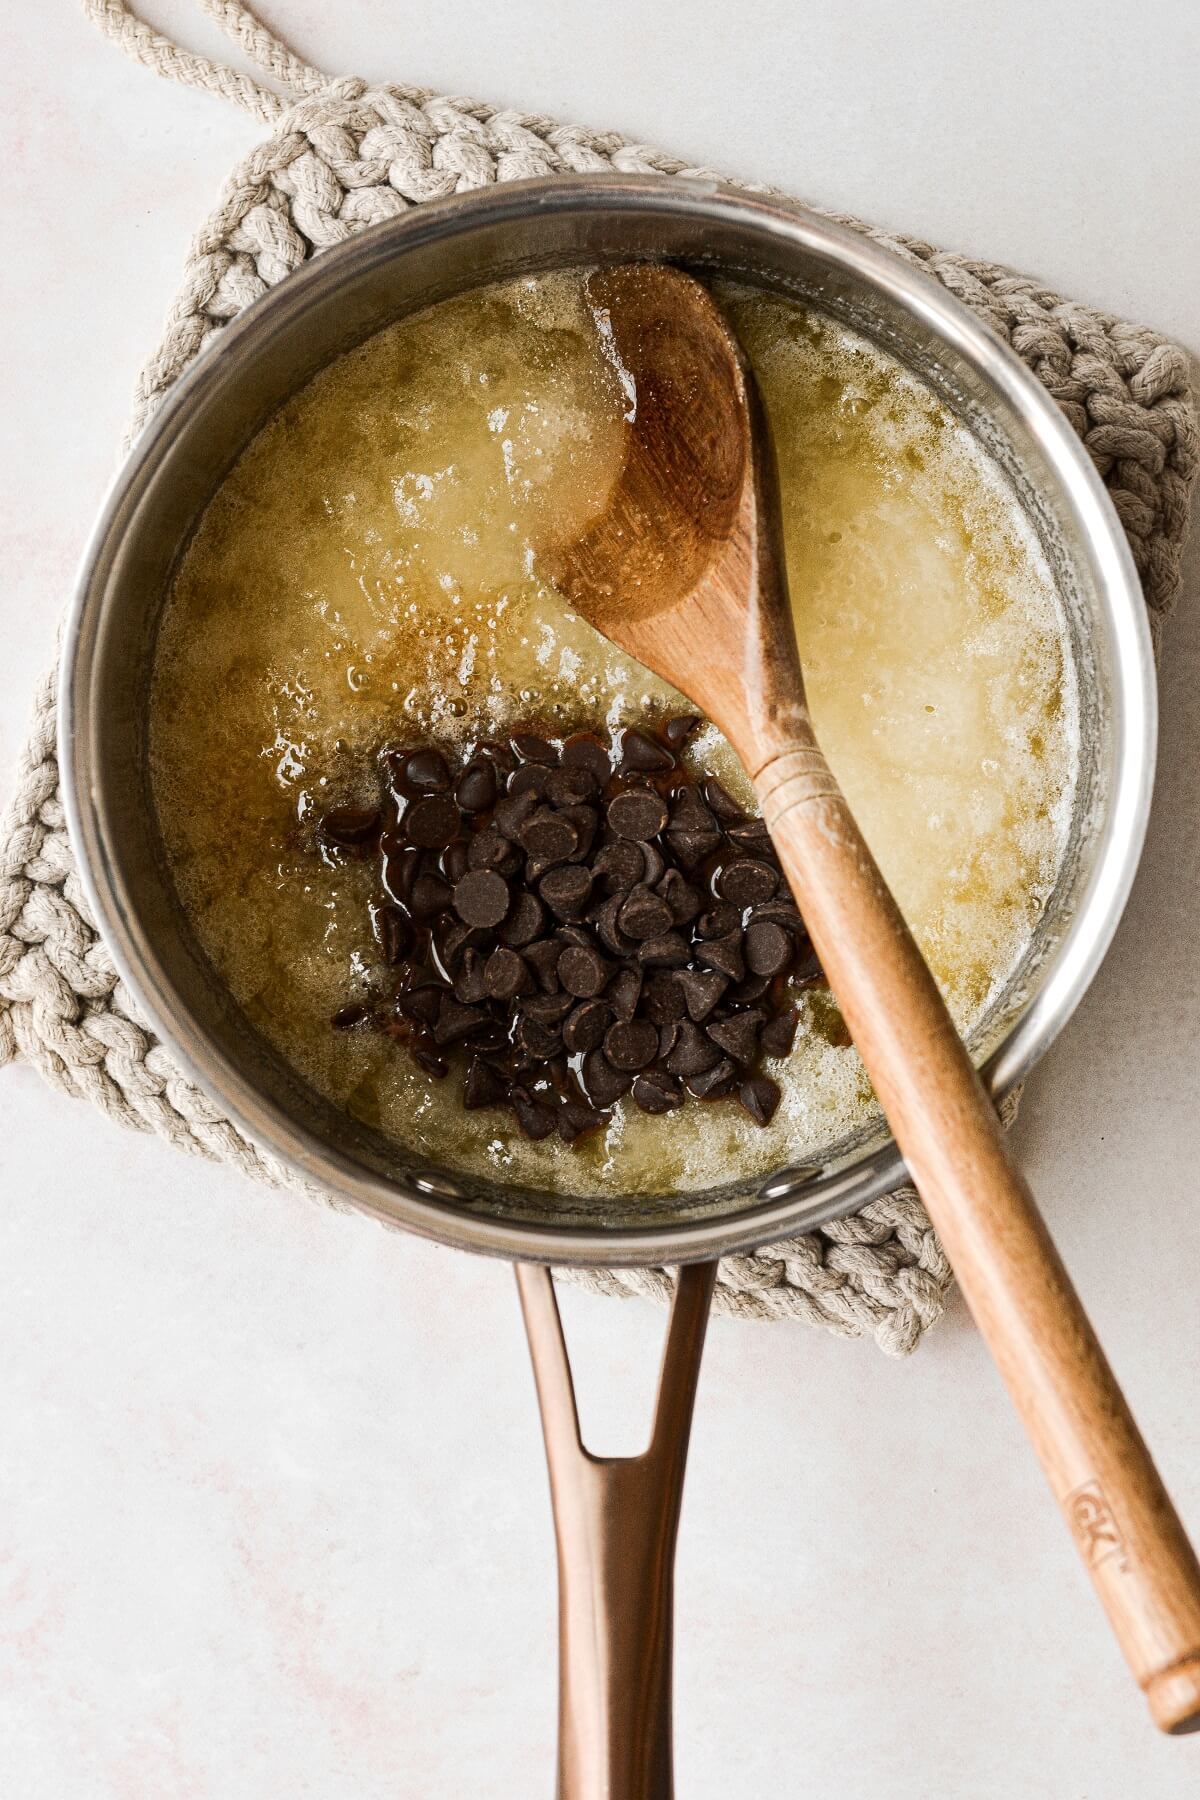 Stirring in chocolate chips to sugar and butter.